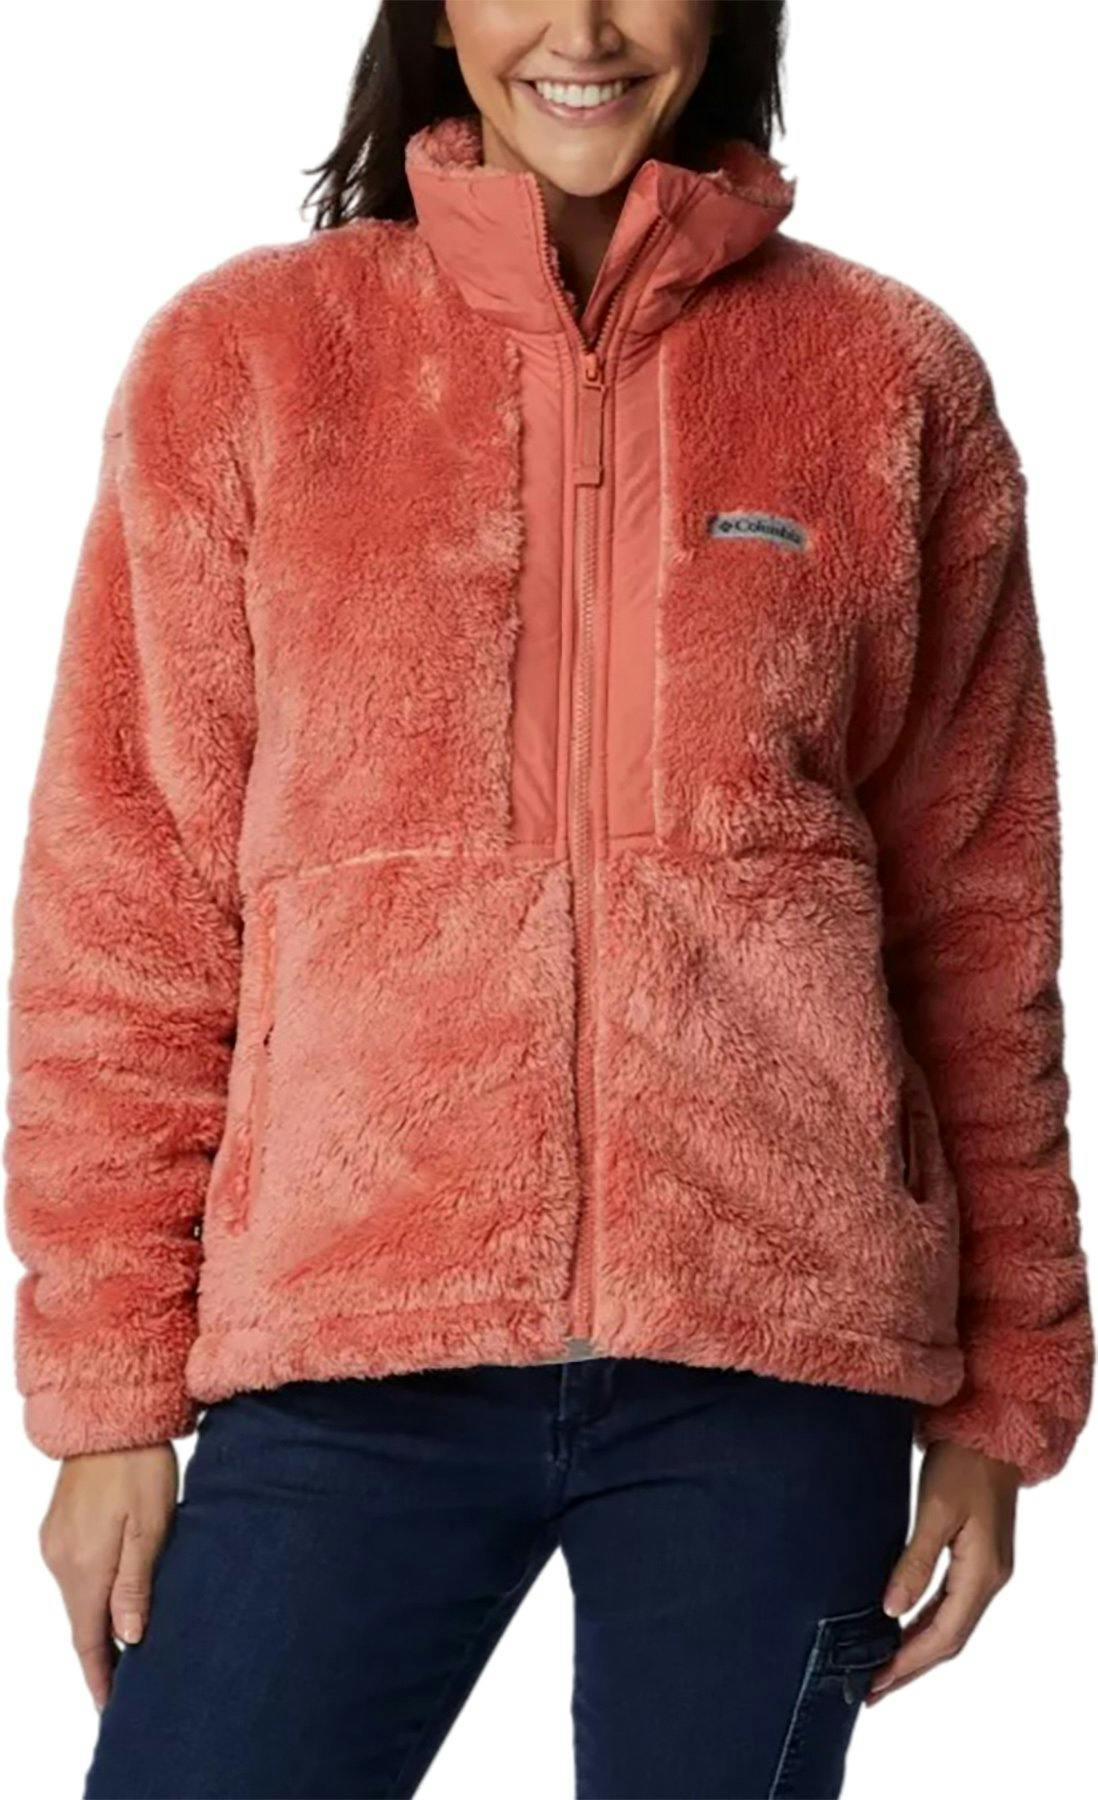 Product image for Boundless Discovery Full Zip Sherpa Jacket - Women's